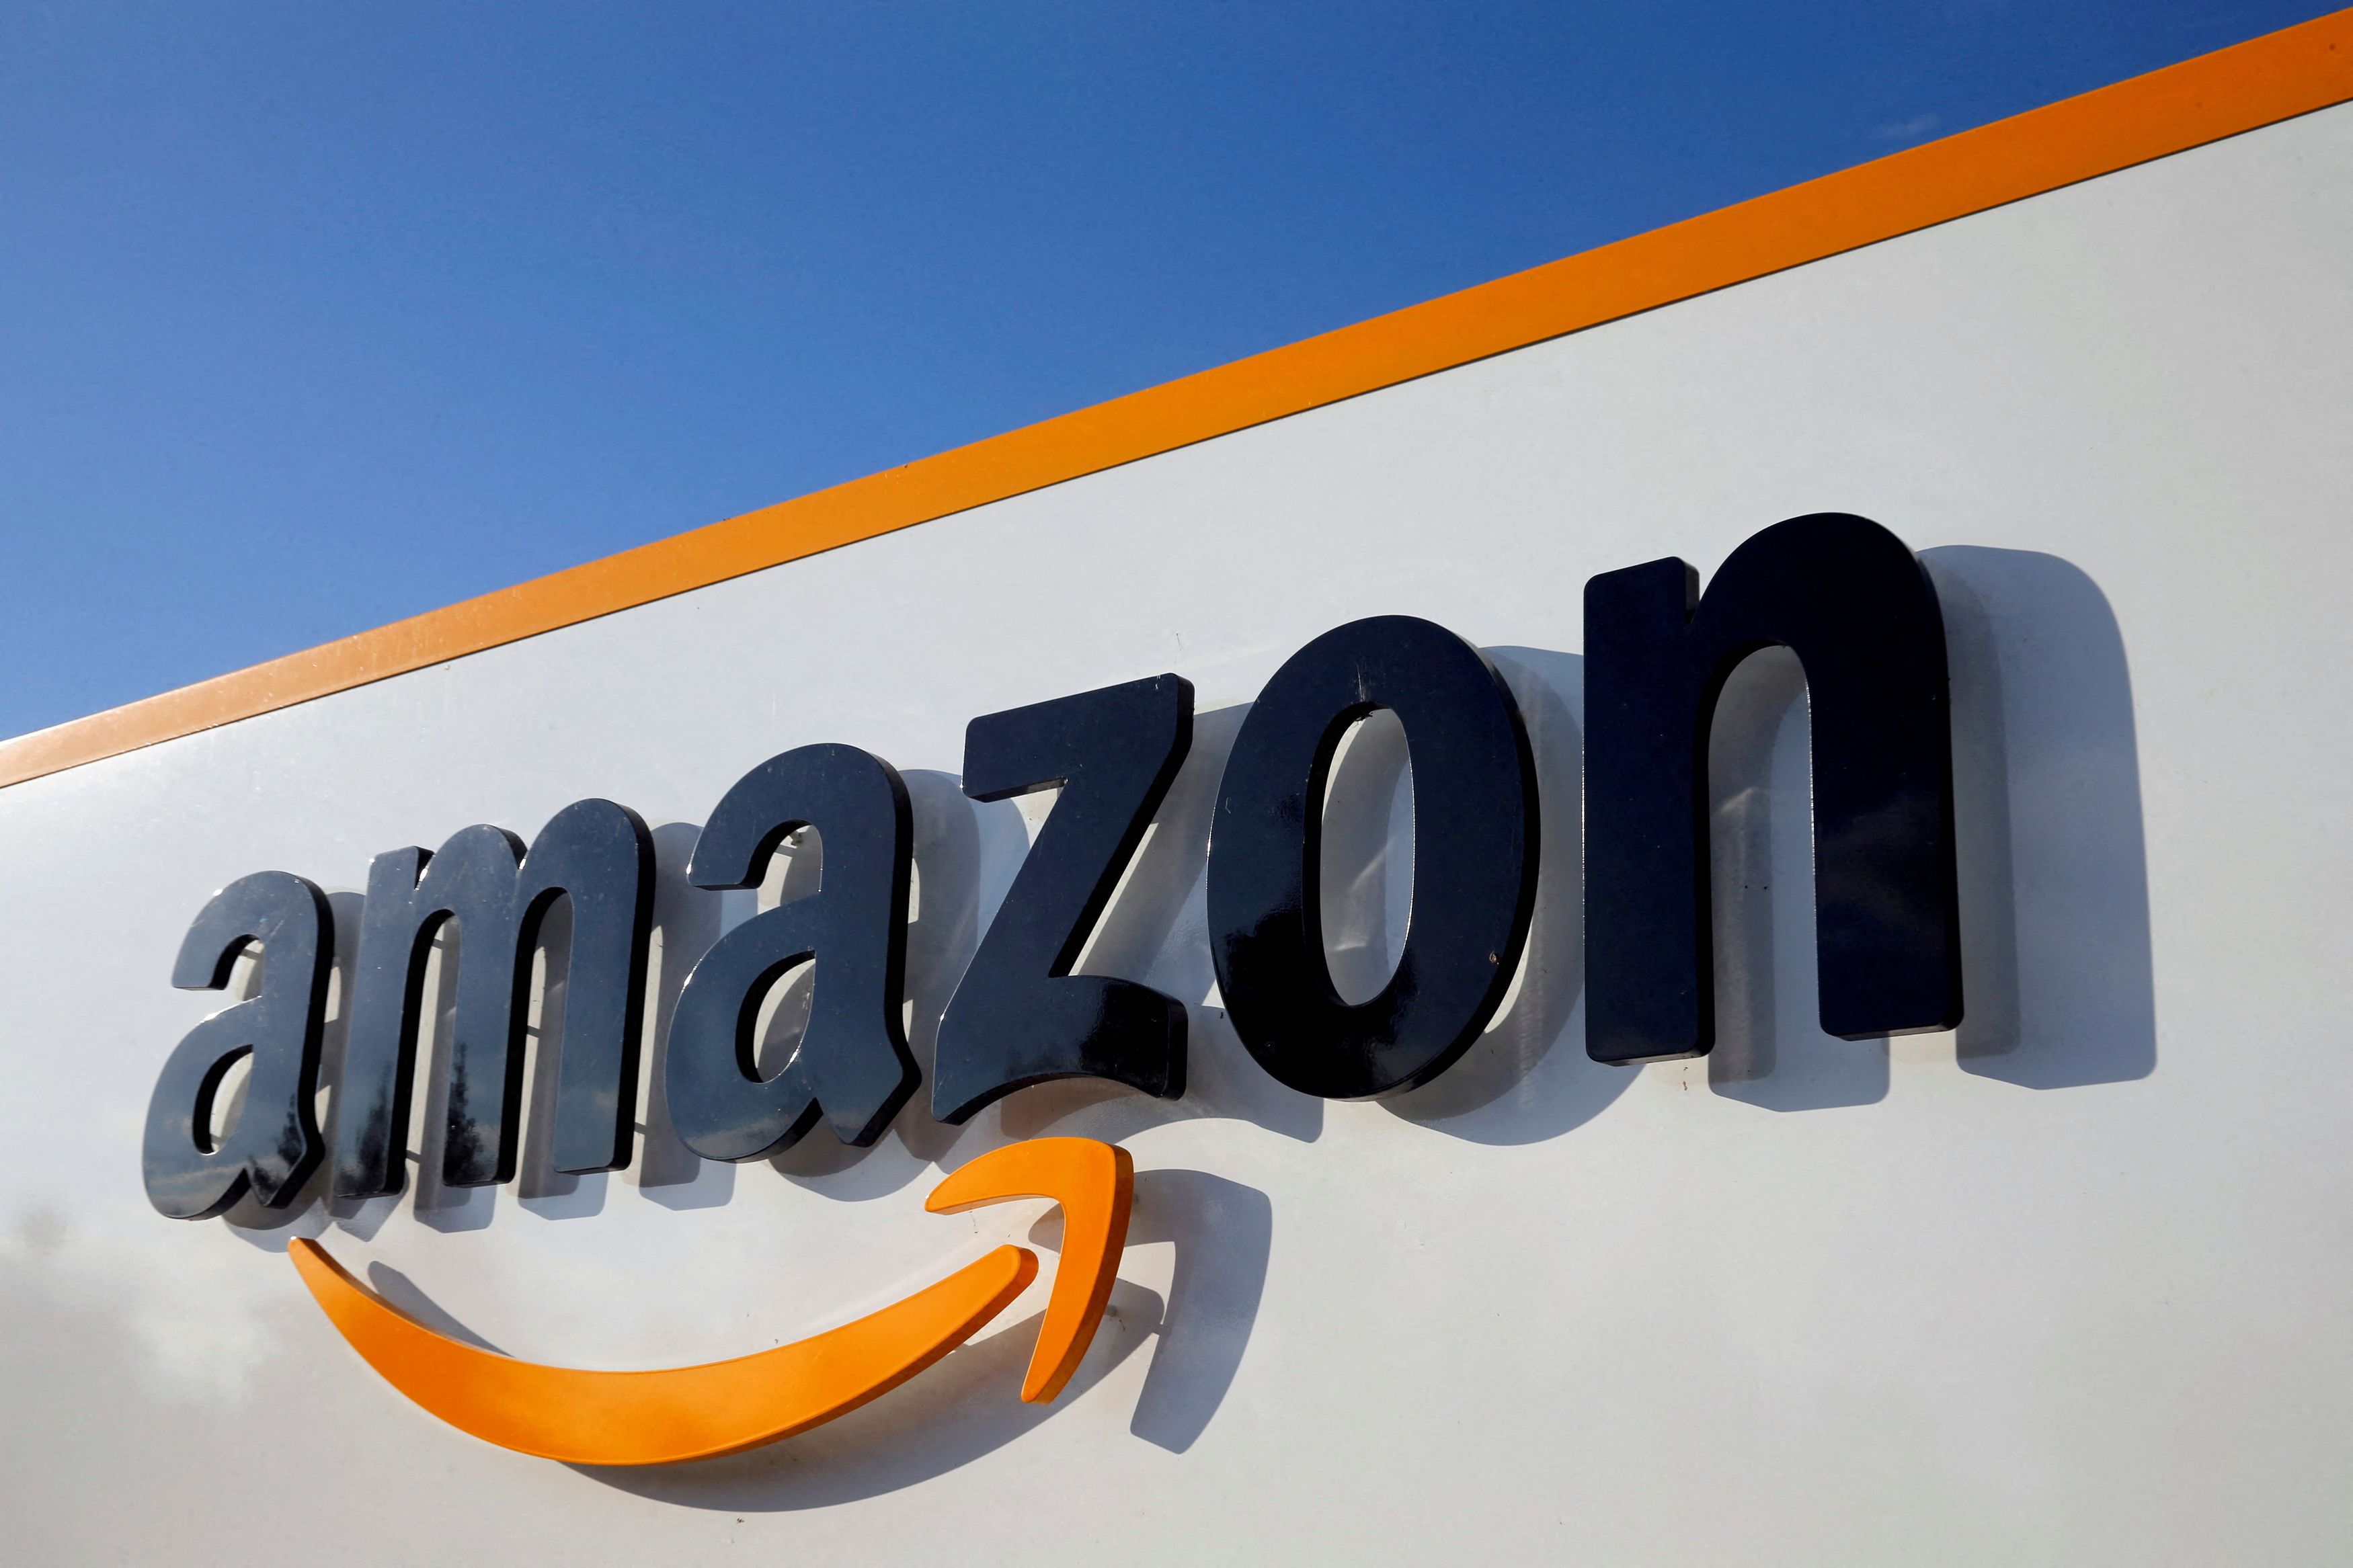 Amazon: Employees spied on users with Ring security cameras